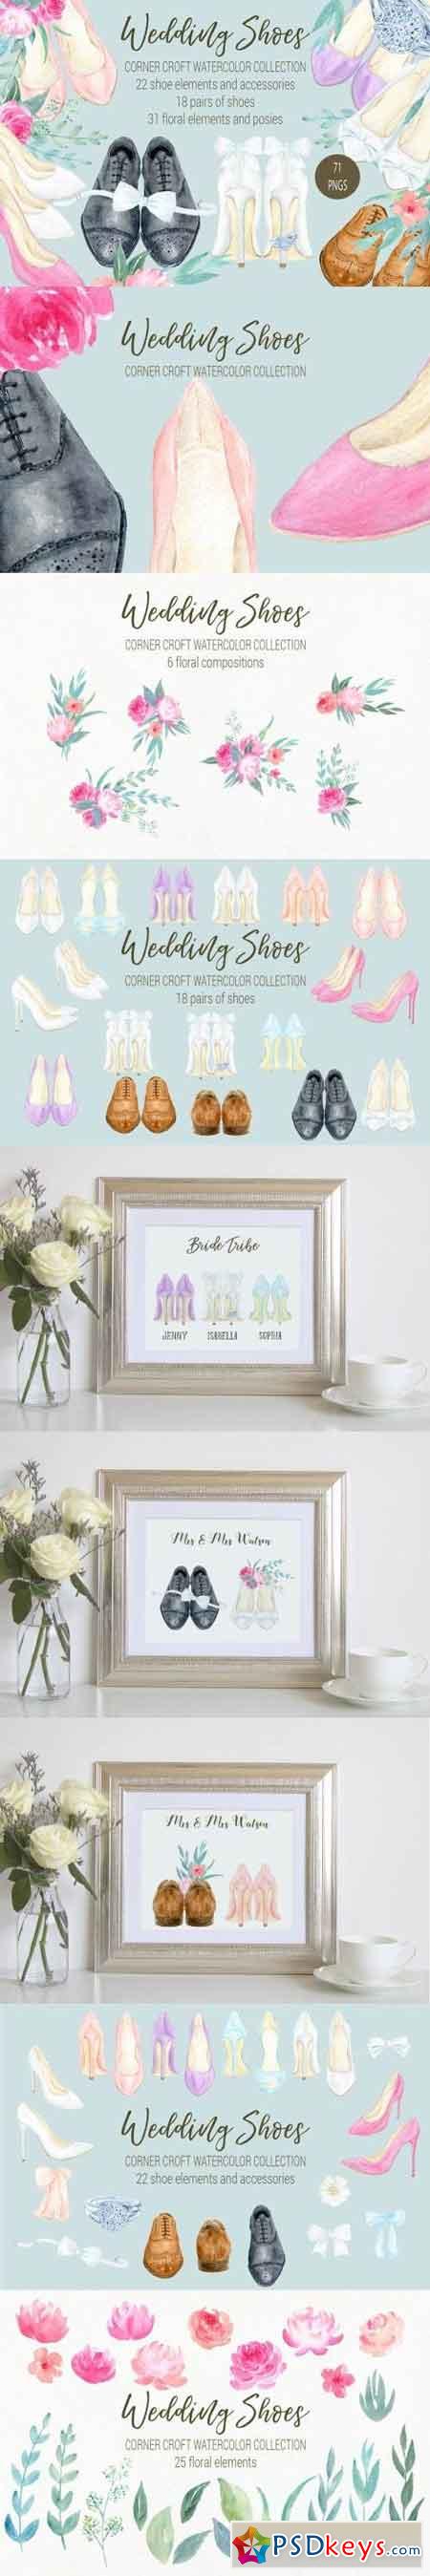 Watercolor Wedding Shoes Collection